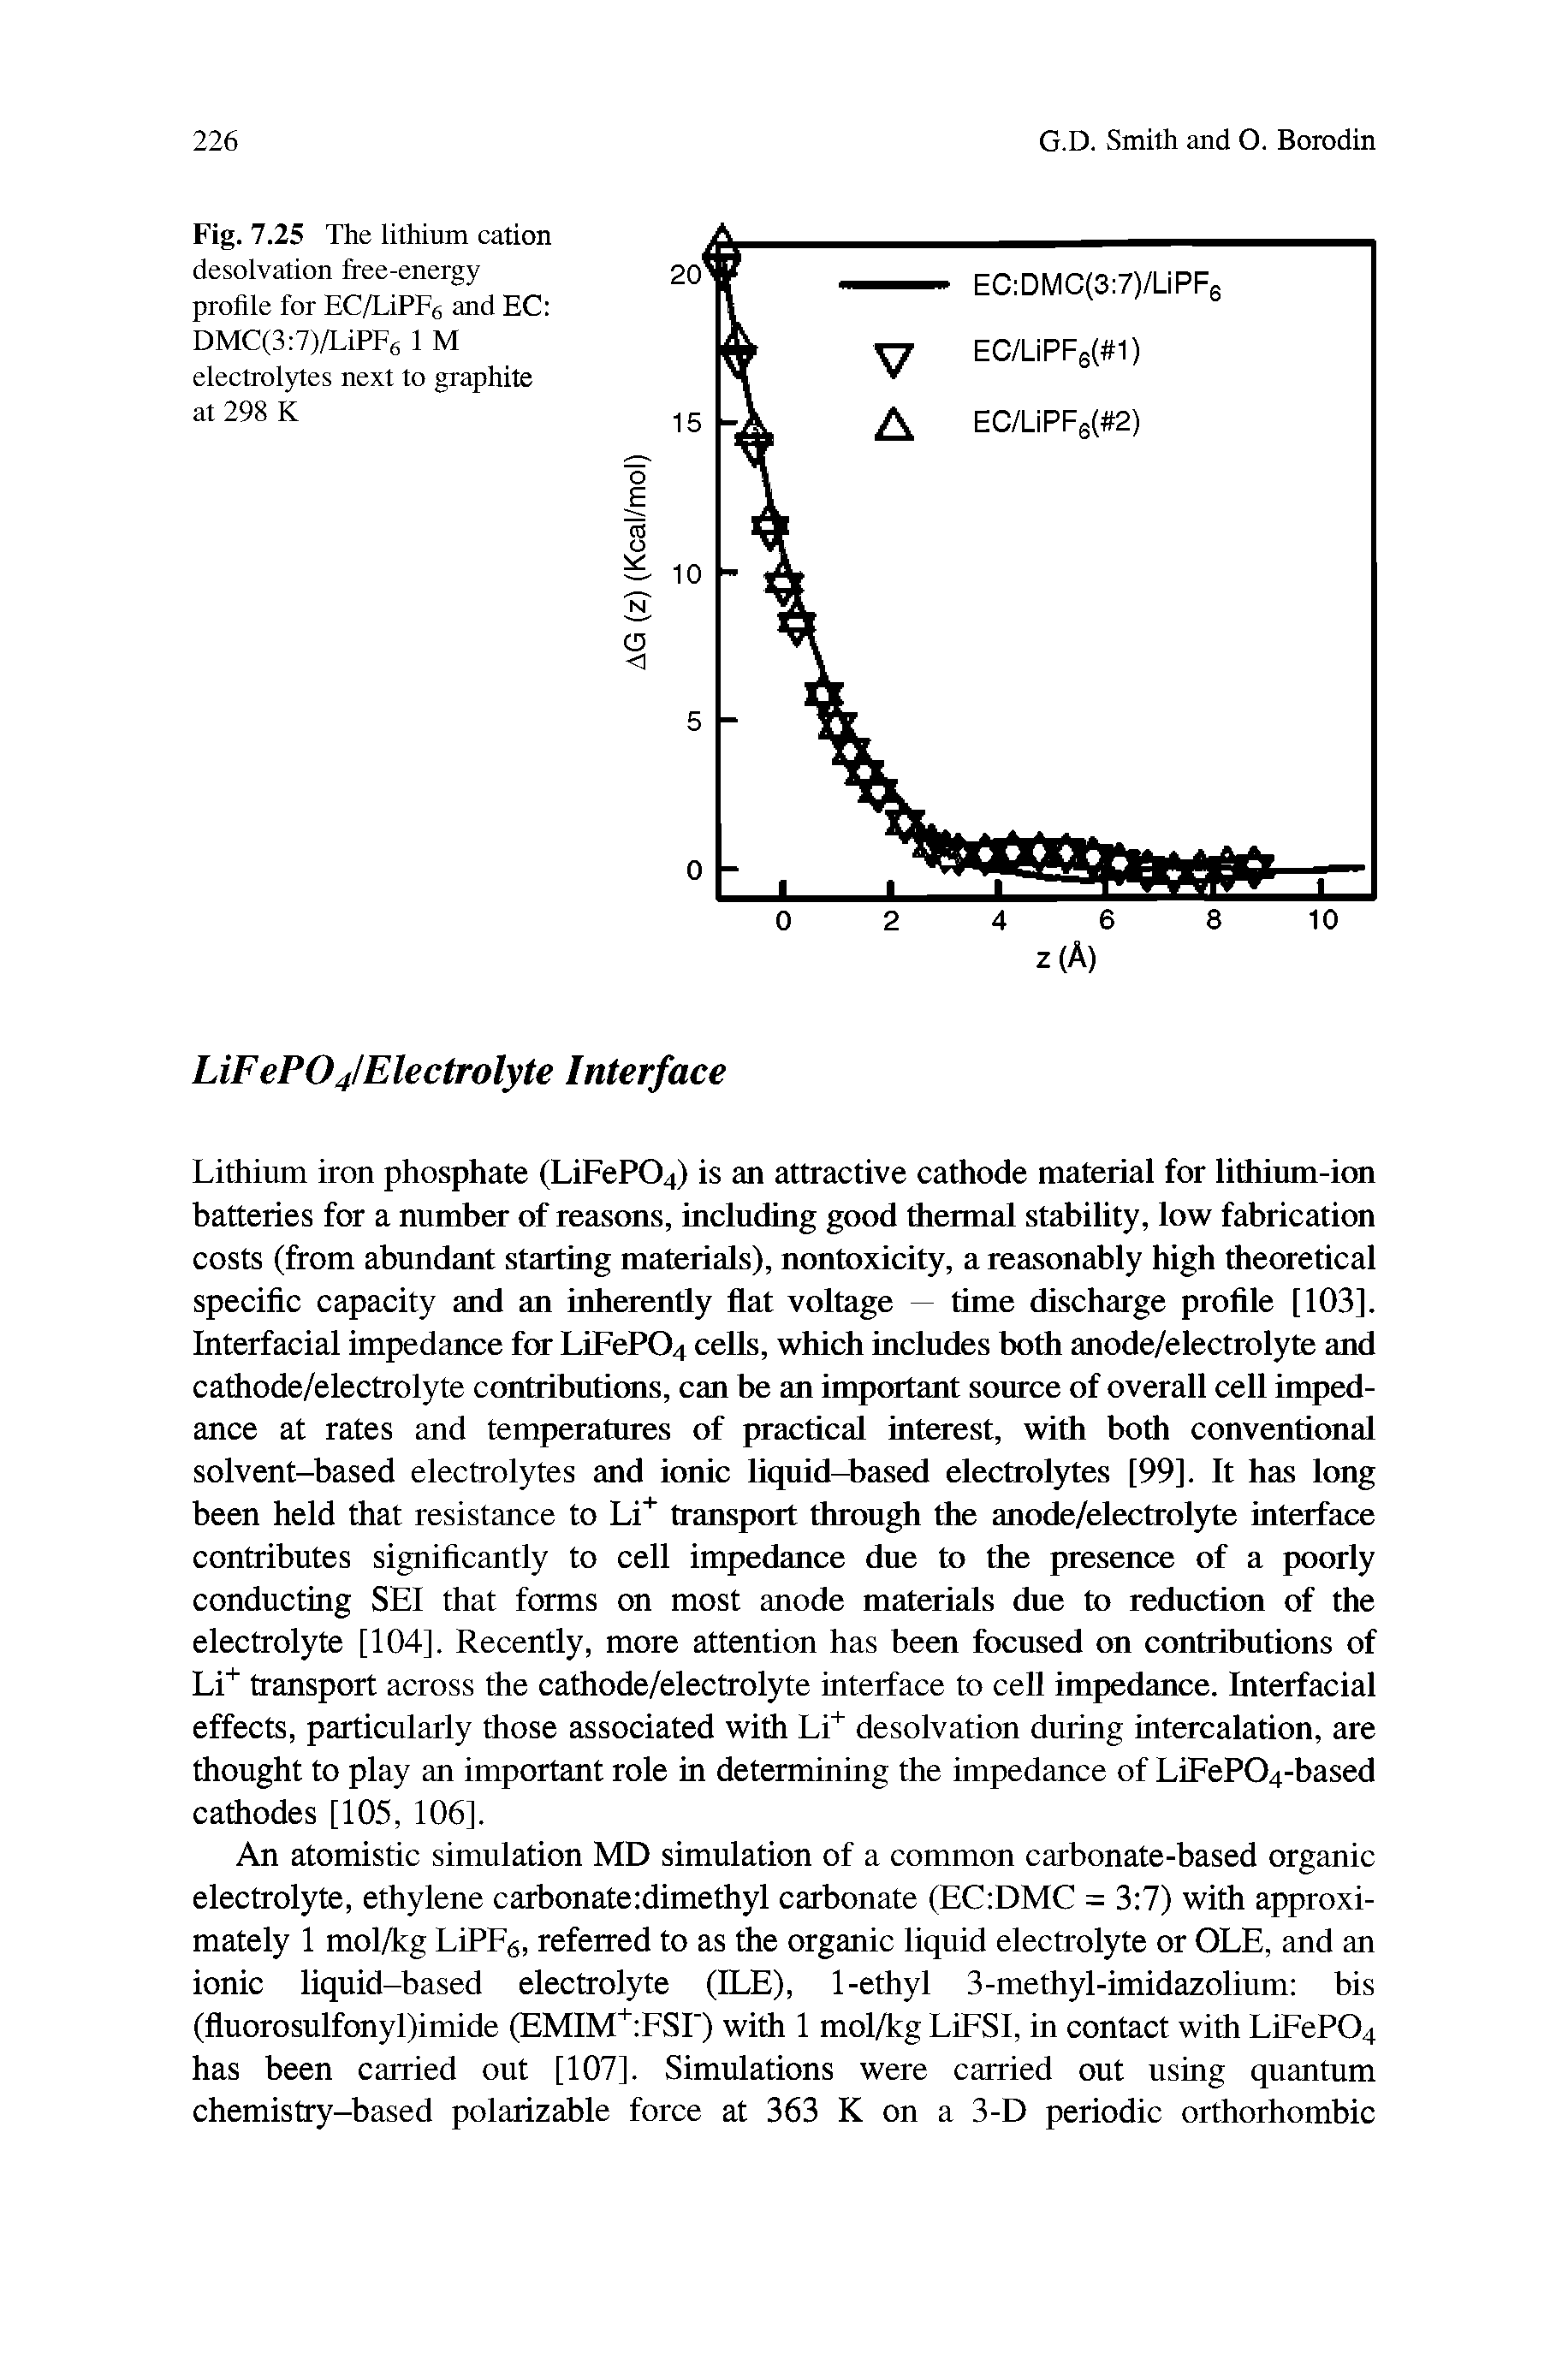 Fig. 7.25 The lithium cation desolvation free-energy profile for EC/LiPFe and EC DMC(3 7)/LiPF6 1 M electrolytes next to graphite at 298 K...